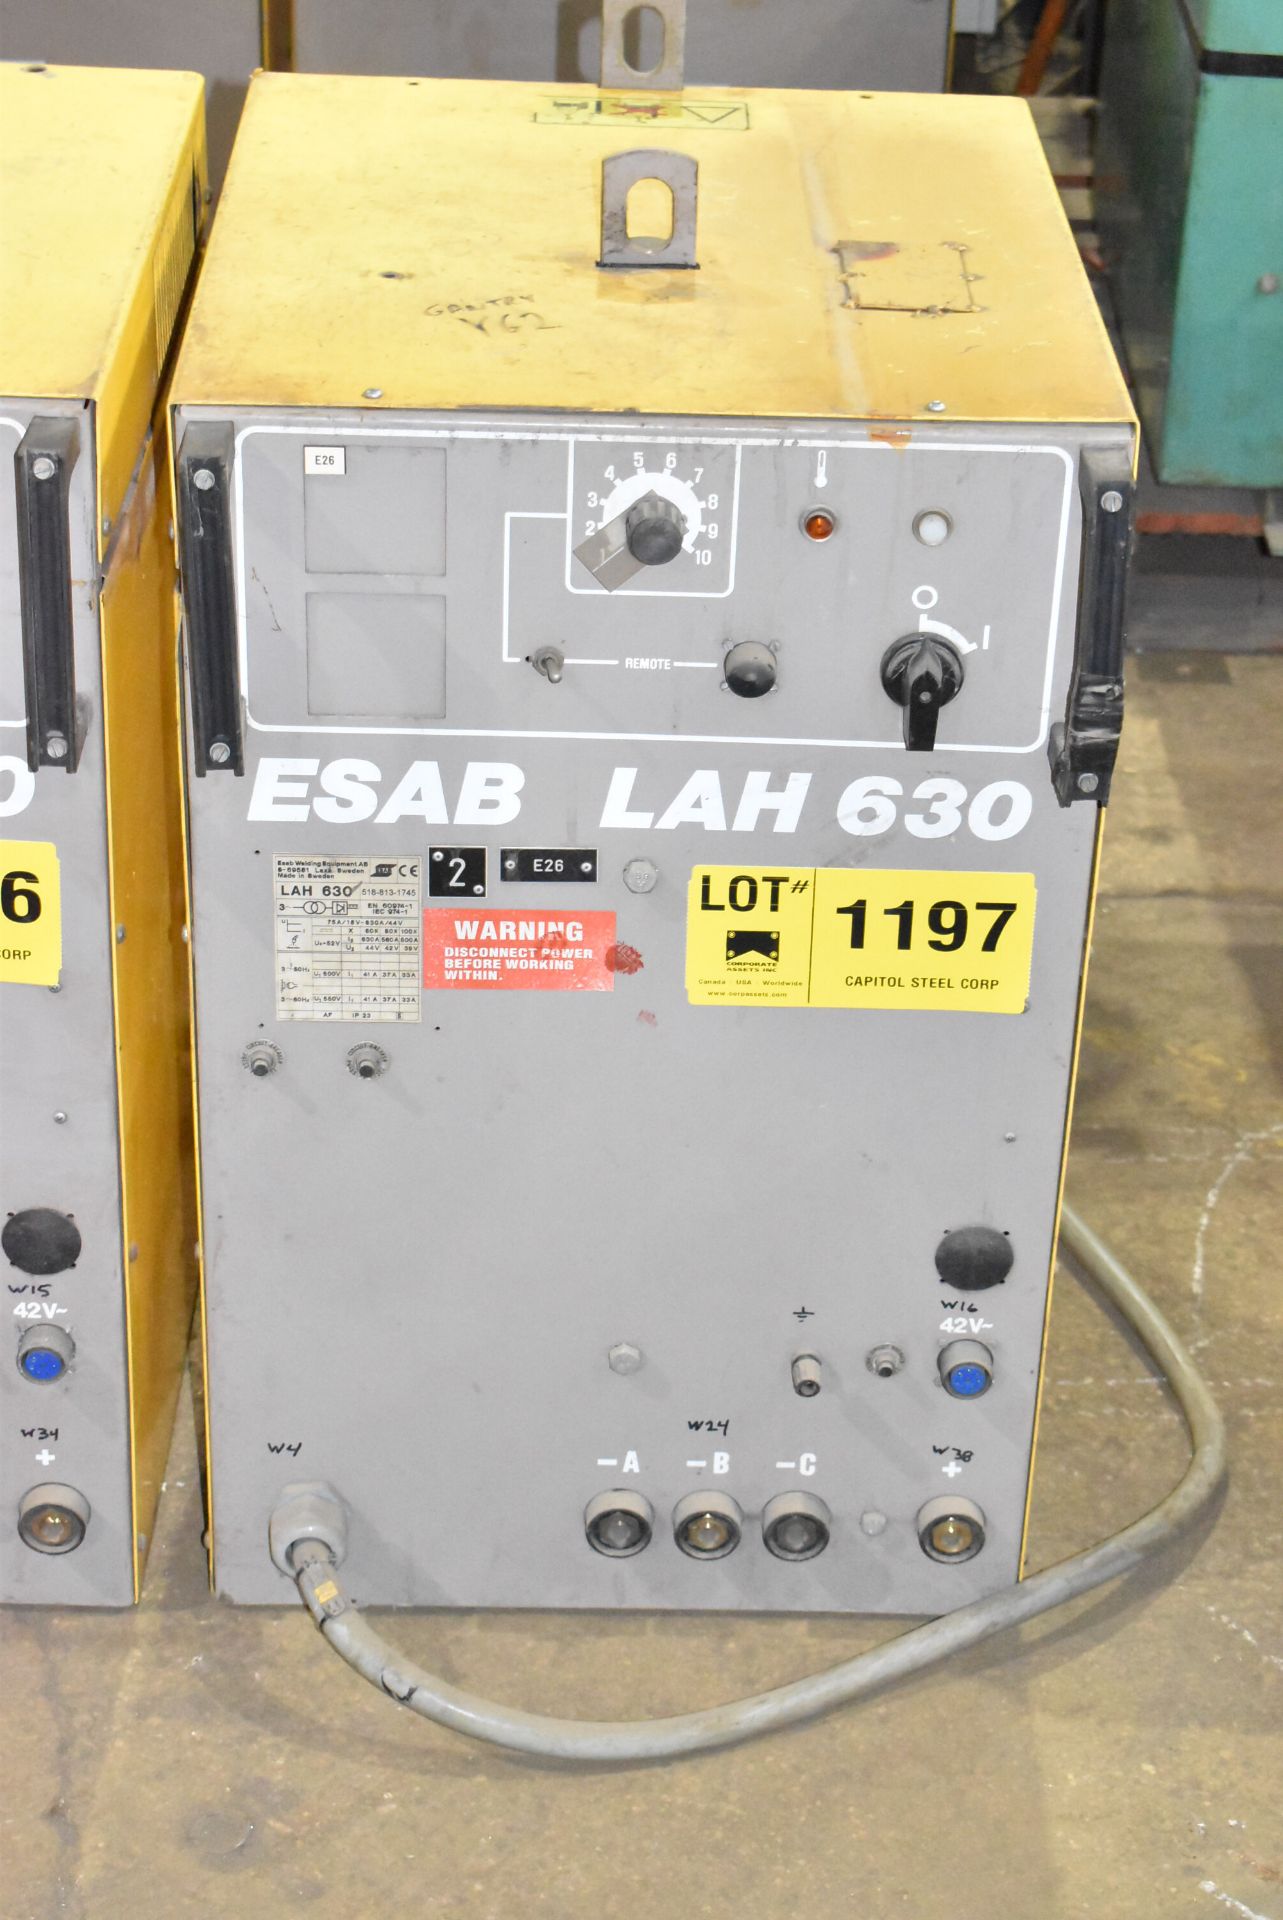 ESAB LAH630 SEMI-AUTOMATIC MIG/MAG WELDING POWER SOURCE, S/N: N/A [RIGGING FEES FOR LOT #1197 - $